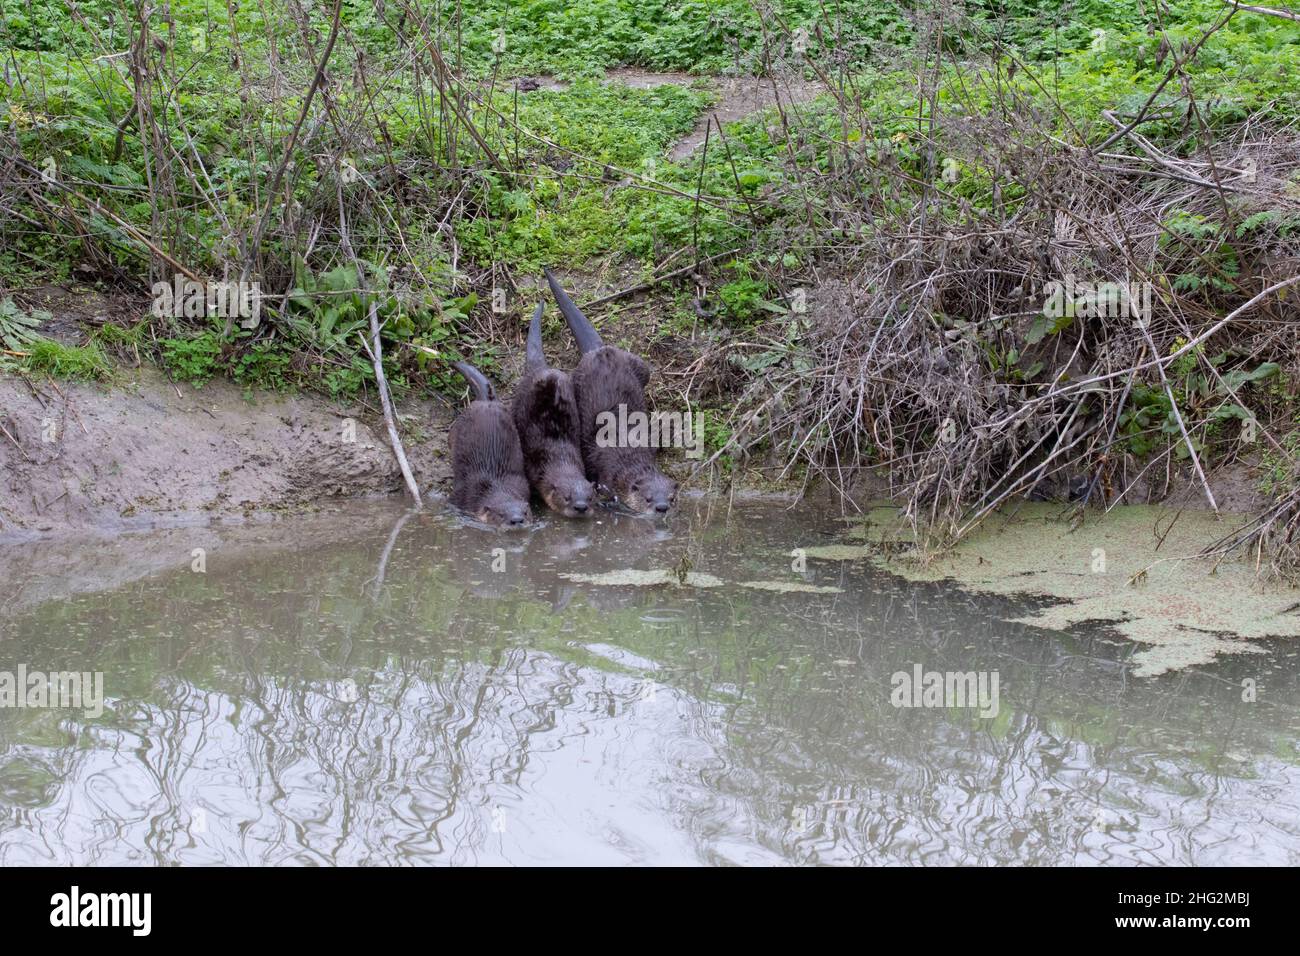 A trio of juvenile River Otters, Lutra canadensis, enter an irrigation canal in California's San Joaquin Valley. Stock Photo